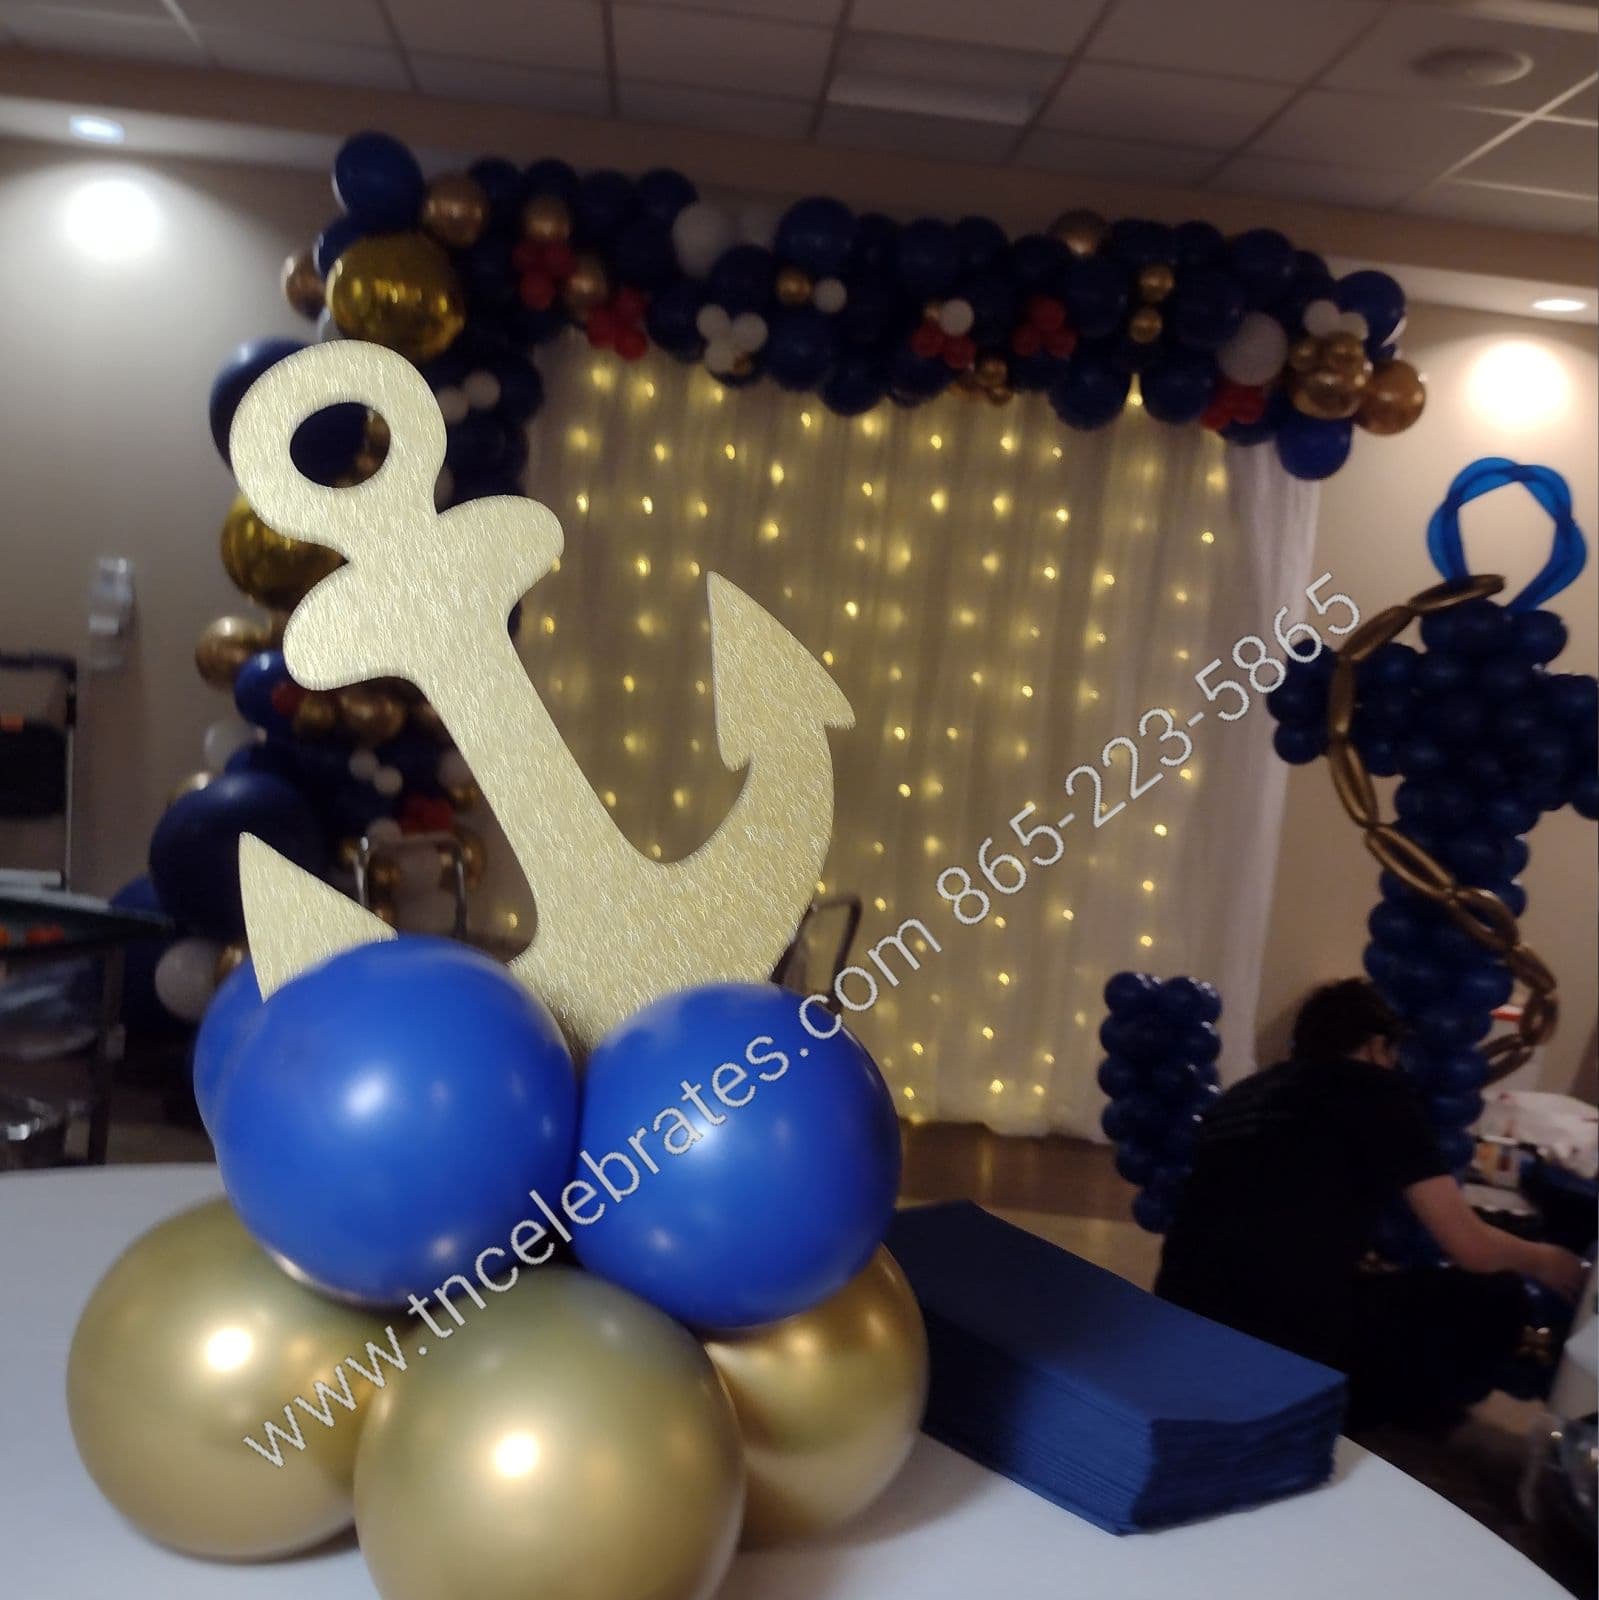 balloon centerpiece with a golden anchor, balloon sculpture of an anchor in the background, with a balloon arch and backdrop